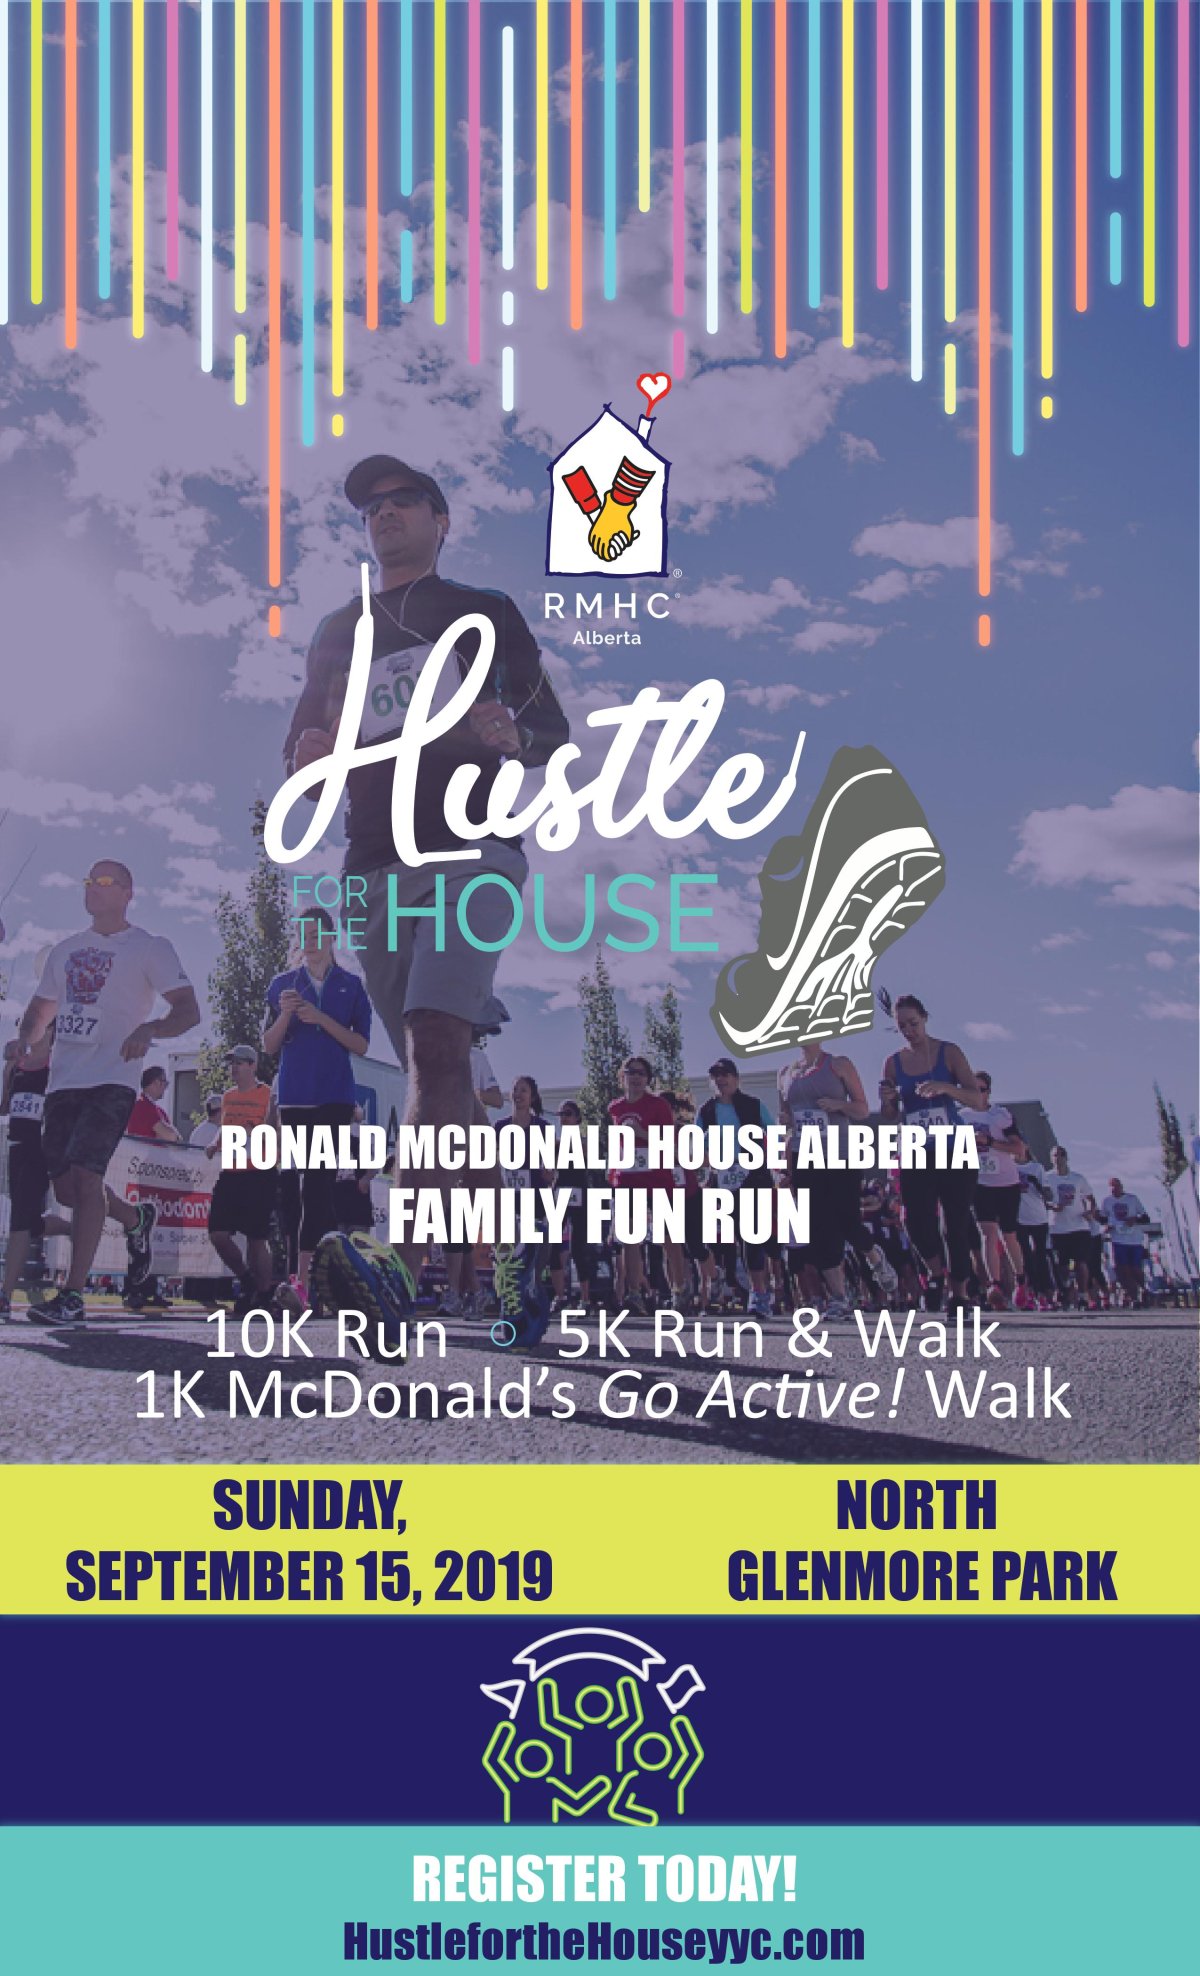 Hustle For The House - image